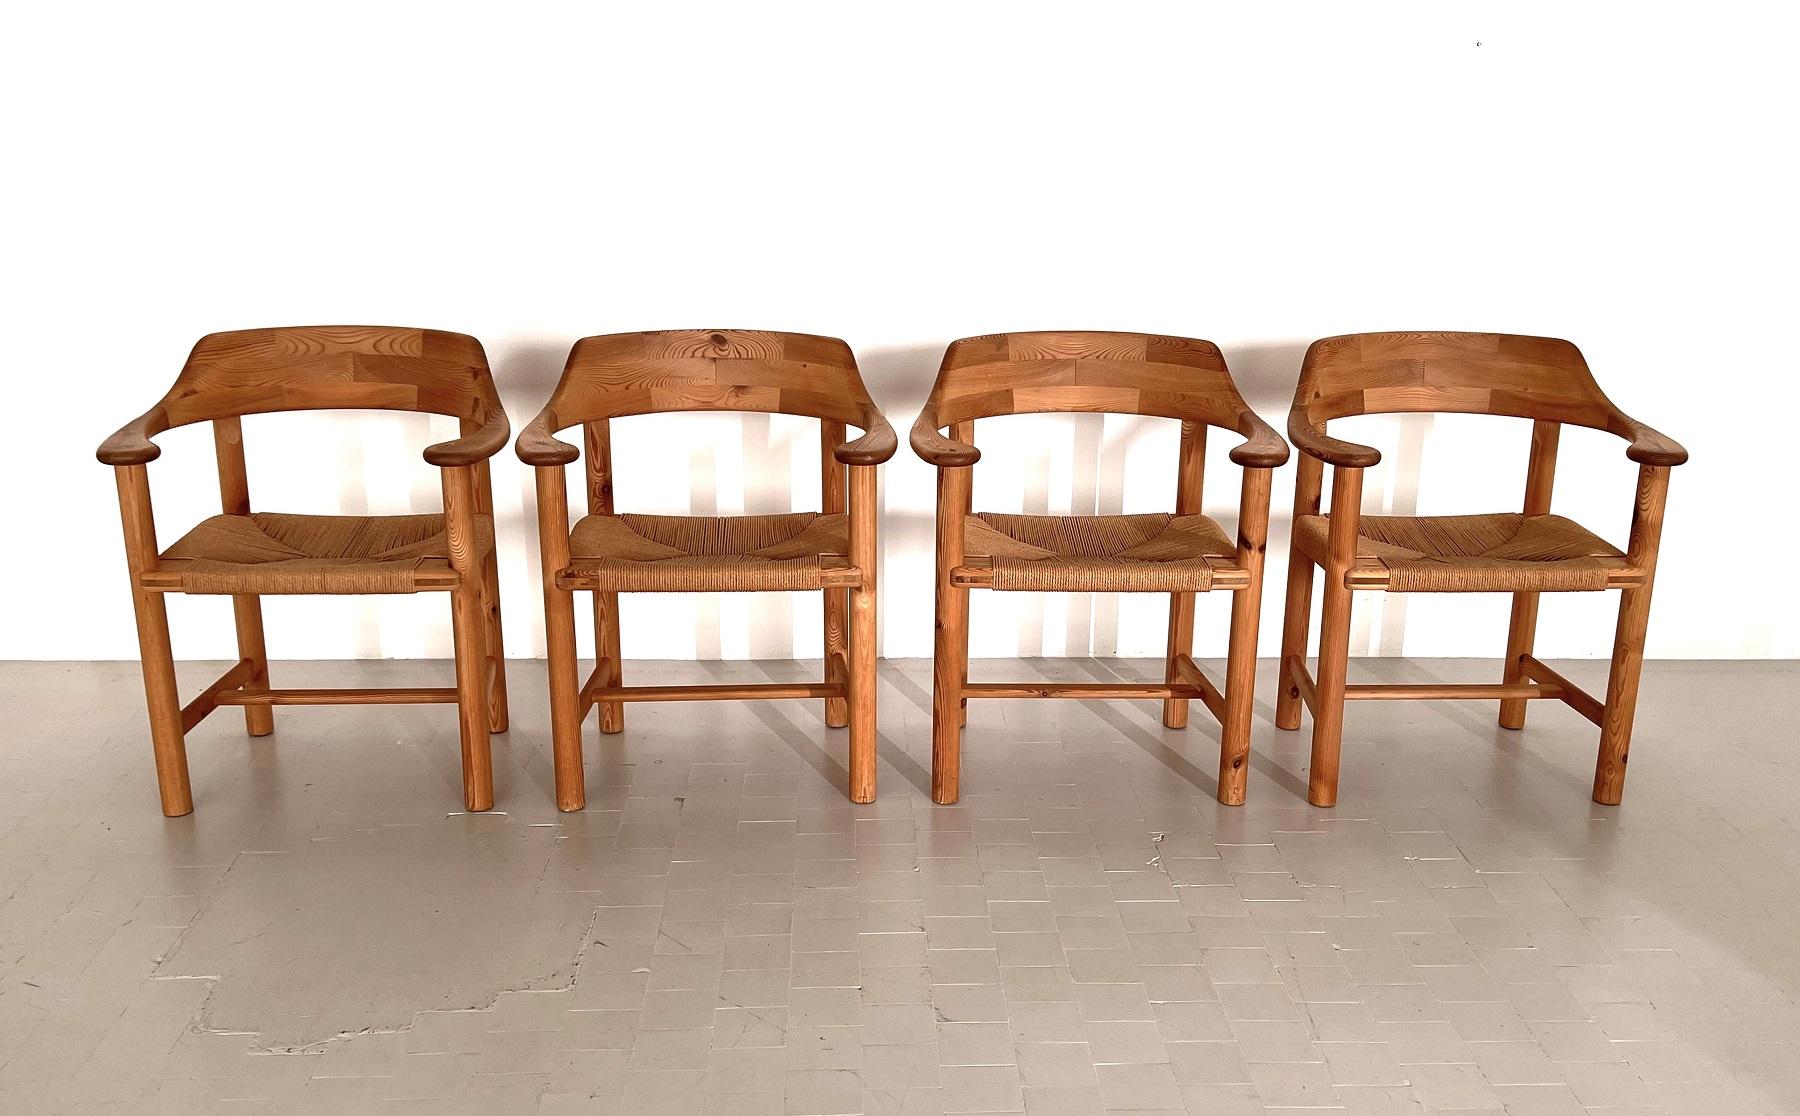 Rainer Daumiller, pinewood, paper cord, Denmark, 1970s

Beautiful, organic and natural set of 4 armchairs or dining chairs in solid pine.
Gorgeous natural expression and grain of the light-colored wood. 
The woven seat in paper cord gives the